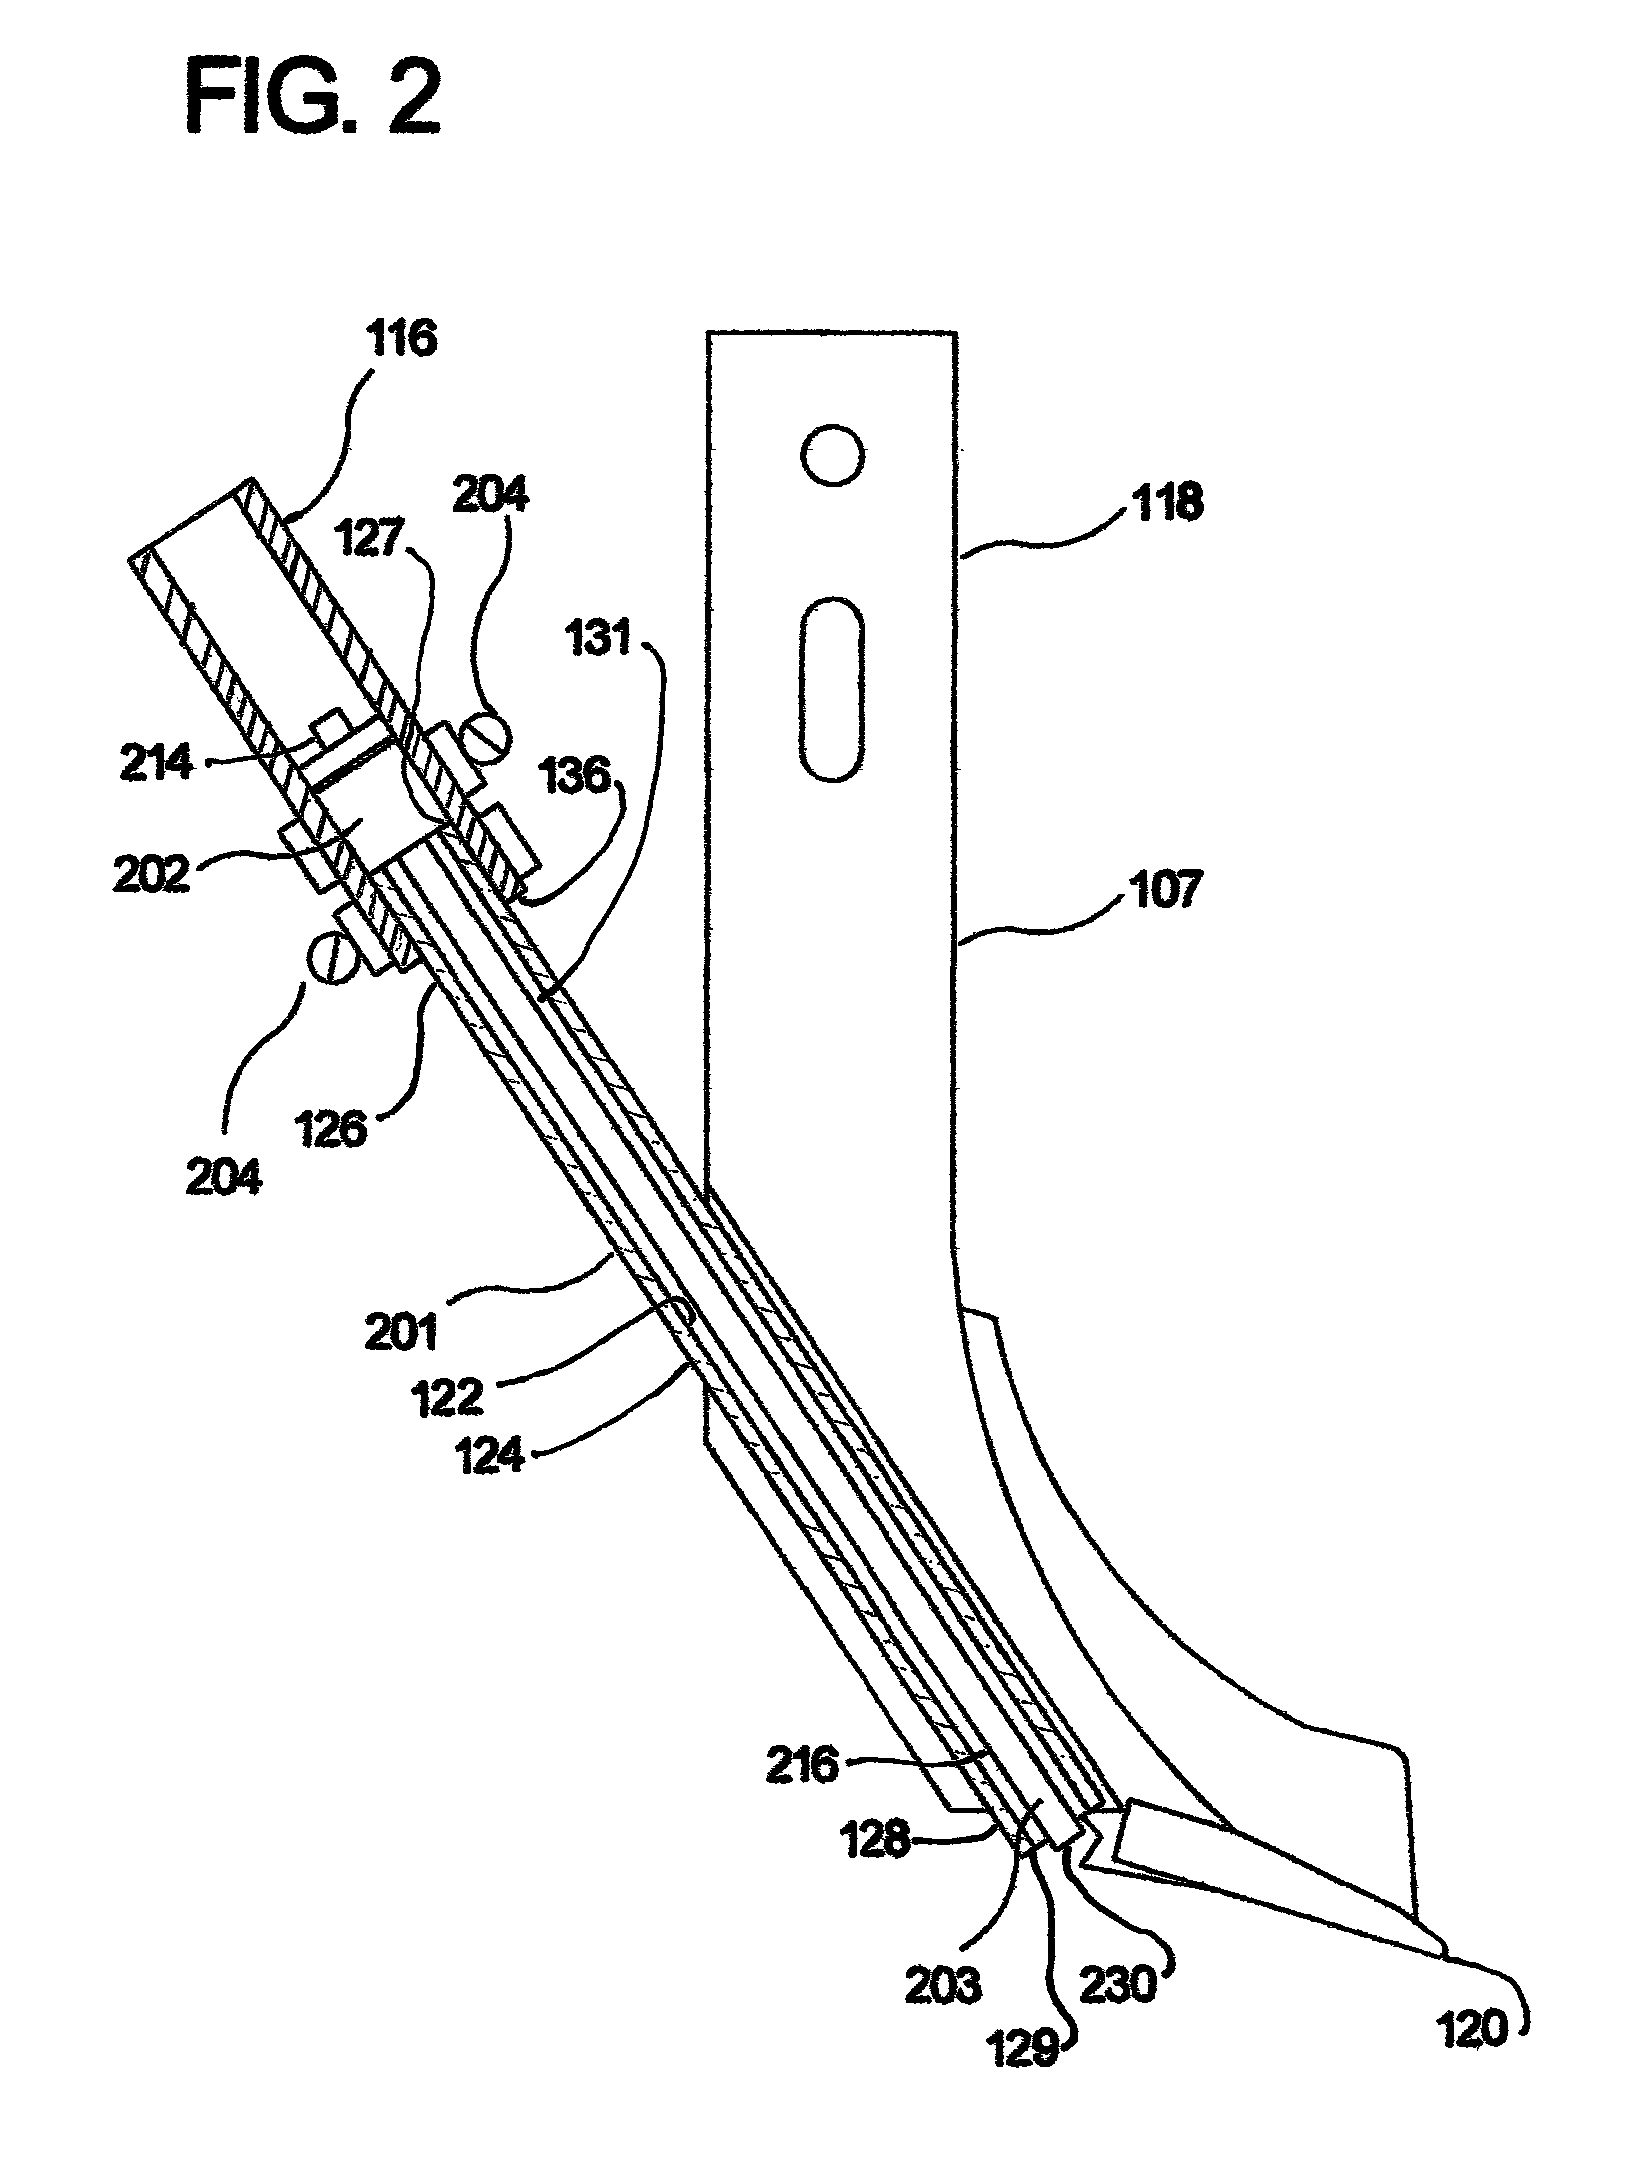 Apparatus for prevention of freezing of soil and crop residue to knife applying liquid anhydrous ammonia to the ground